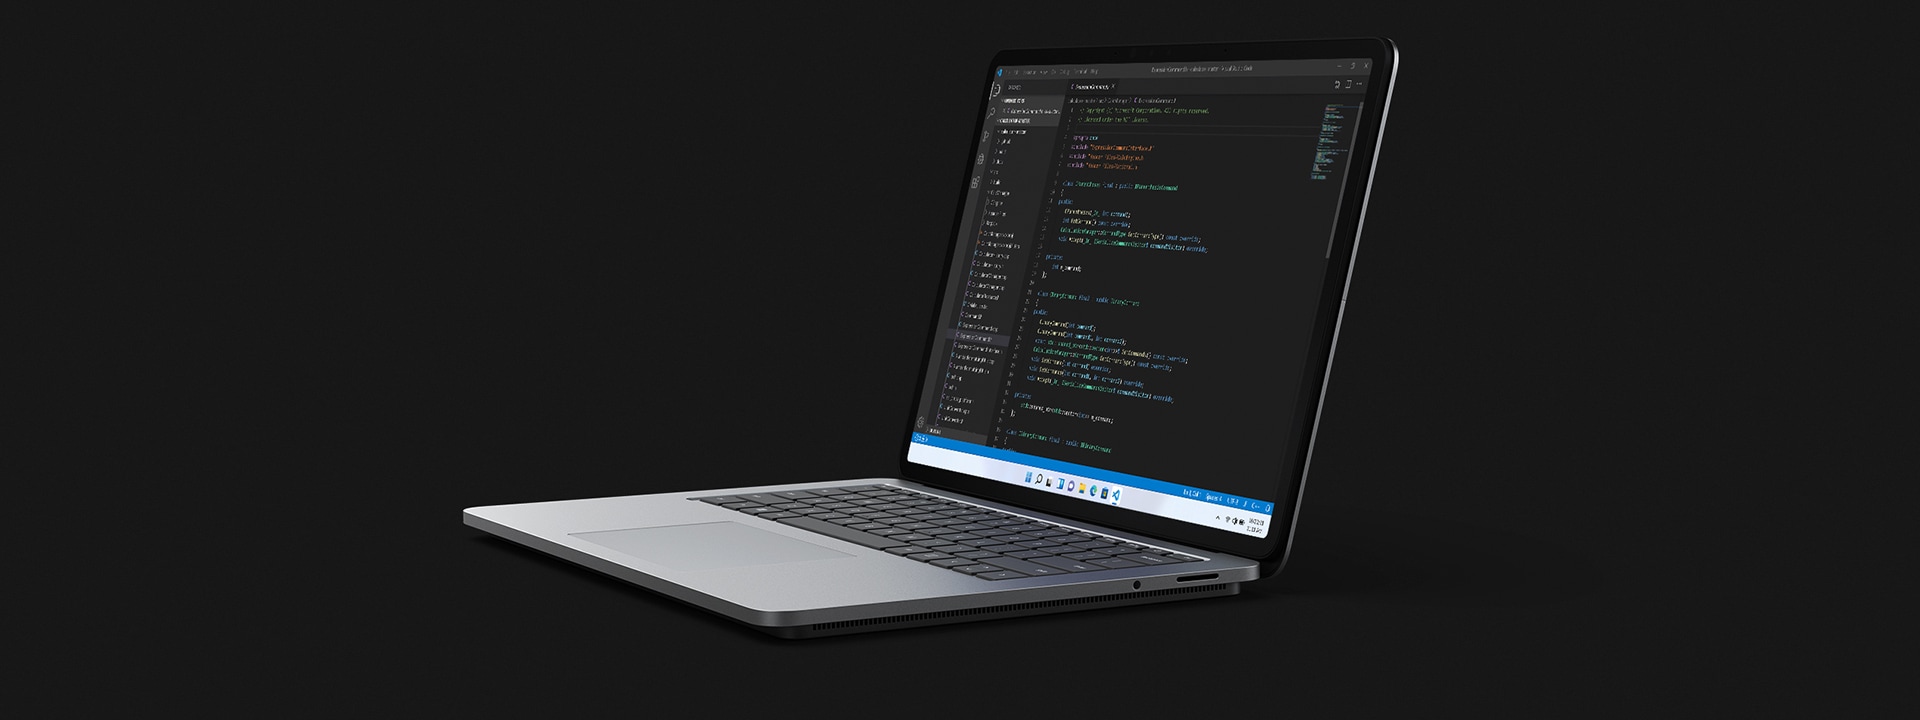 Surface Laptop Studio in laptop mode being used to code.